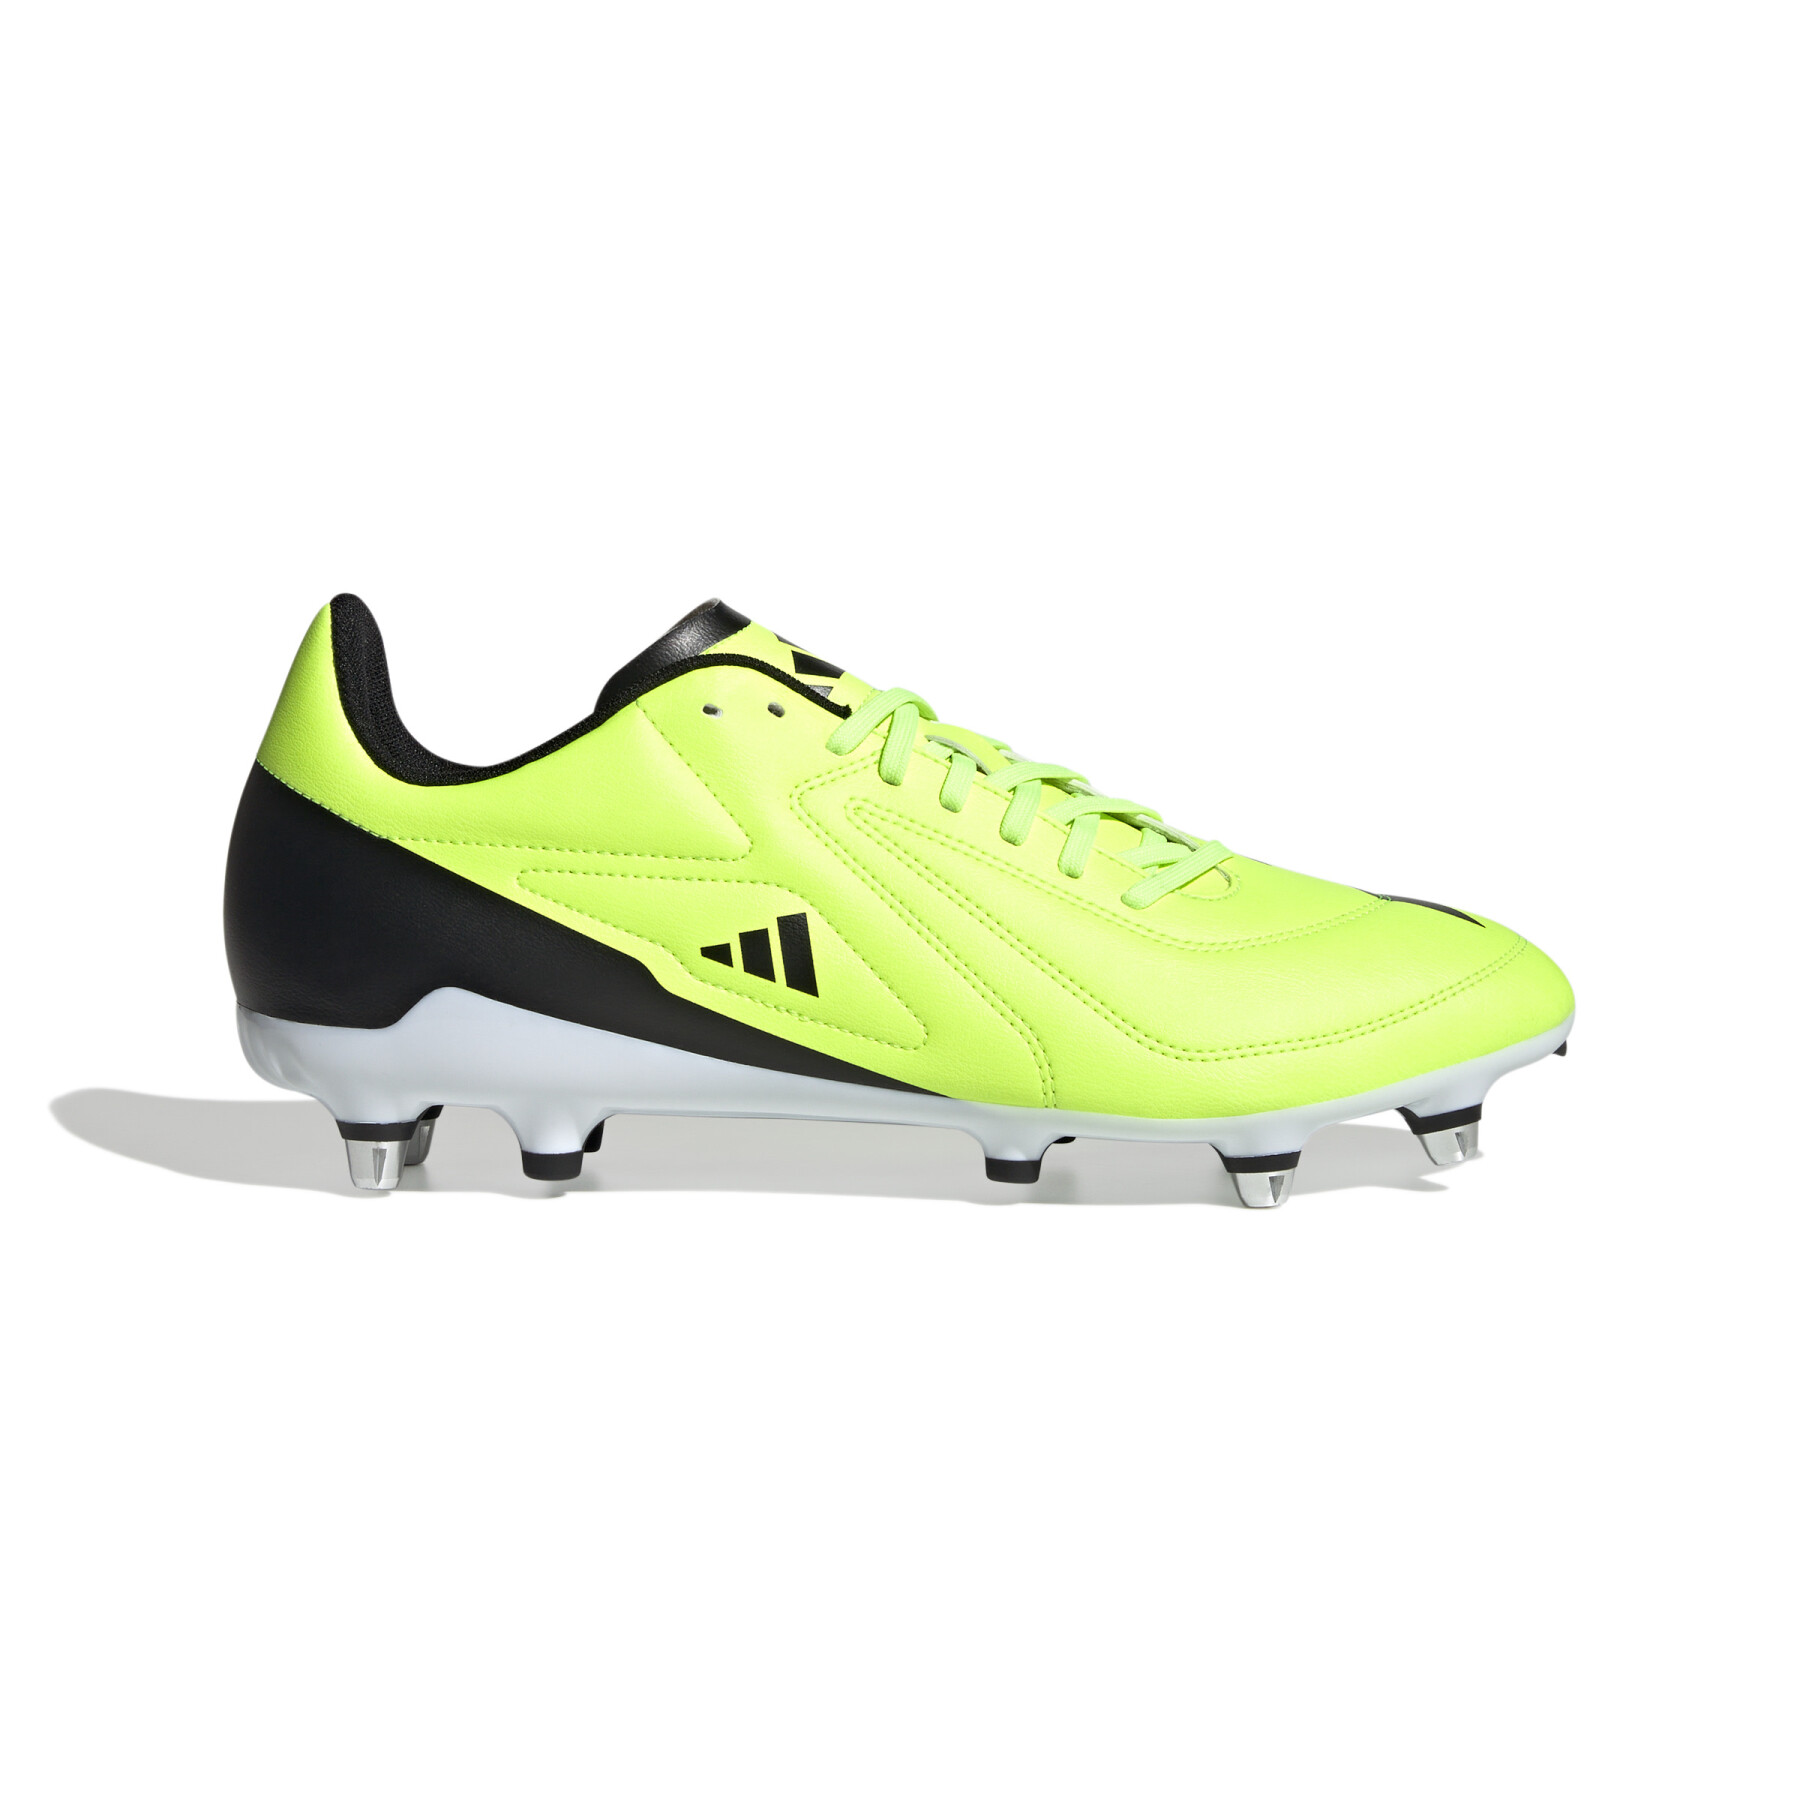 Chaussures de rugby adidas RS-15 SG